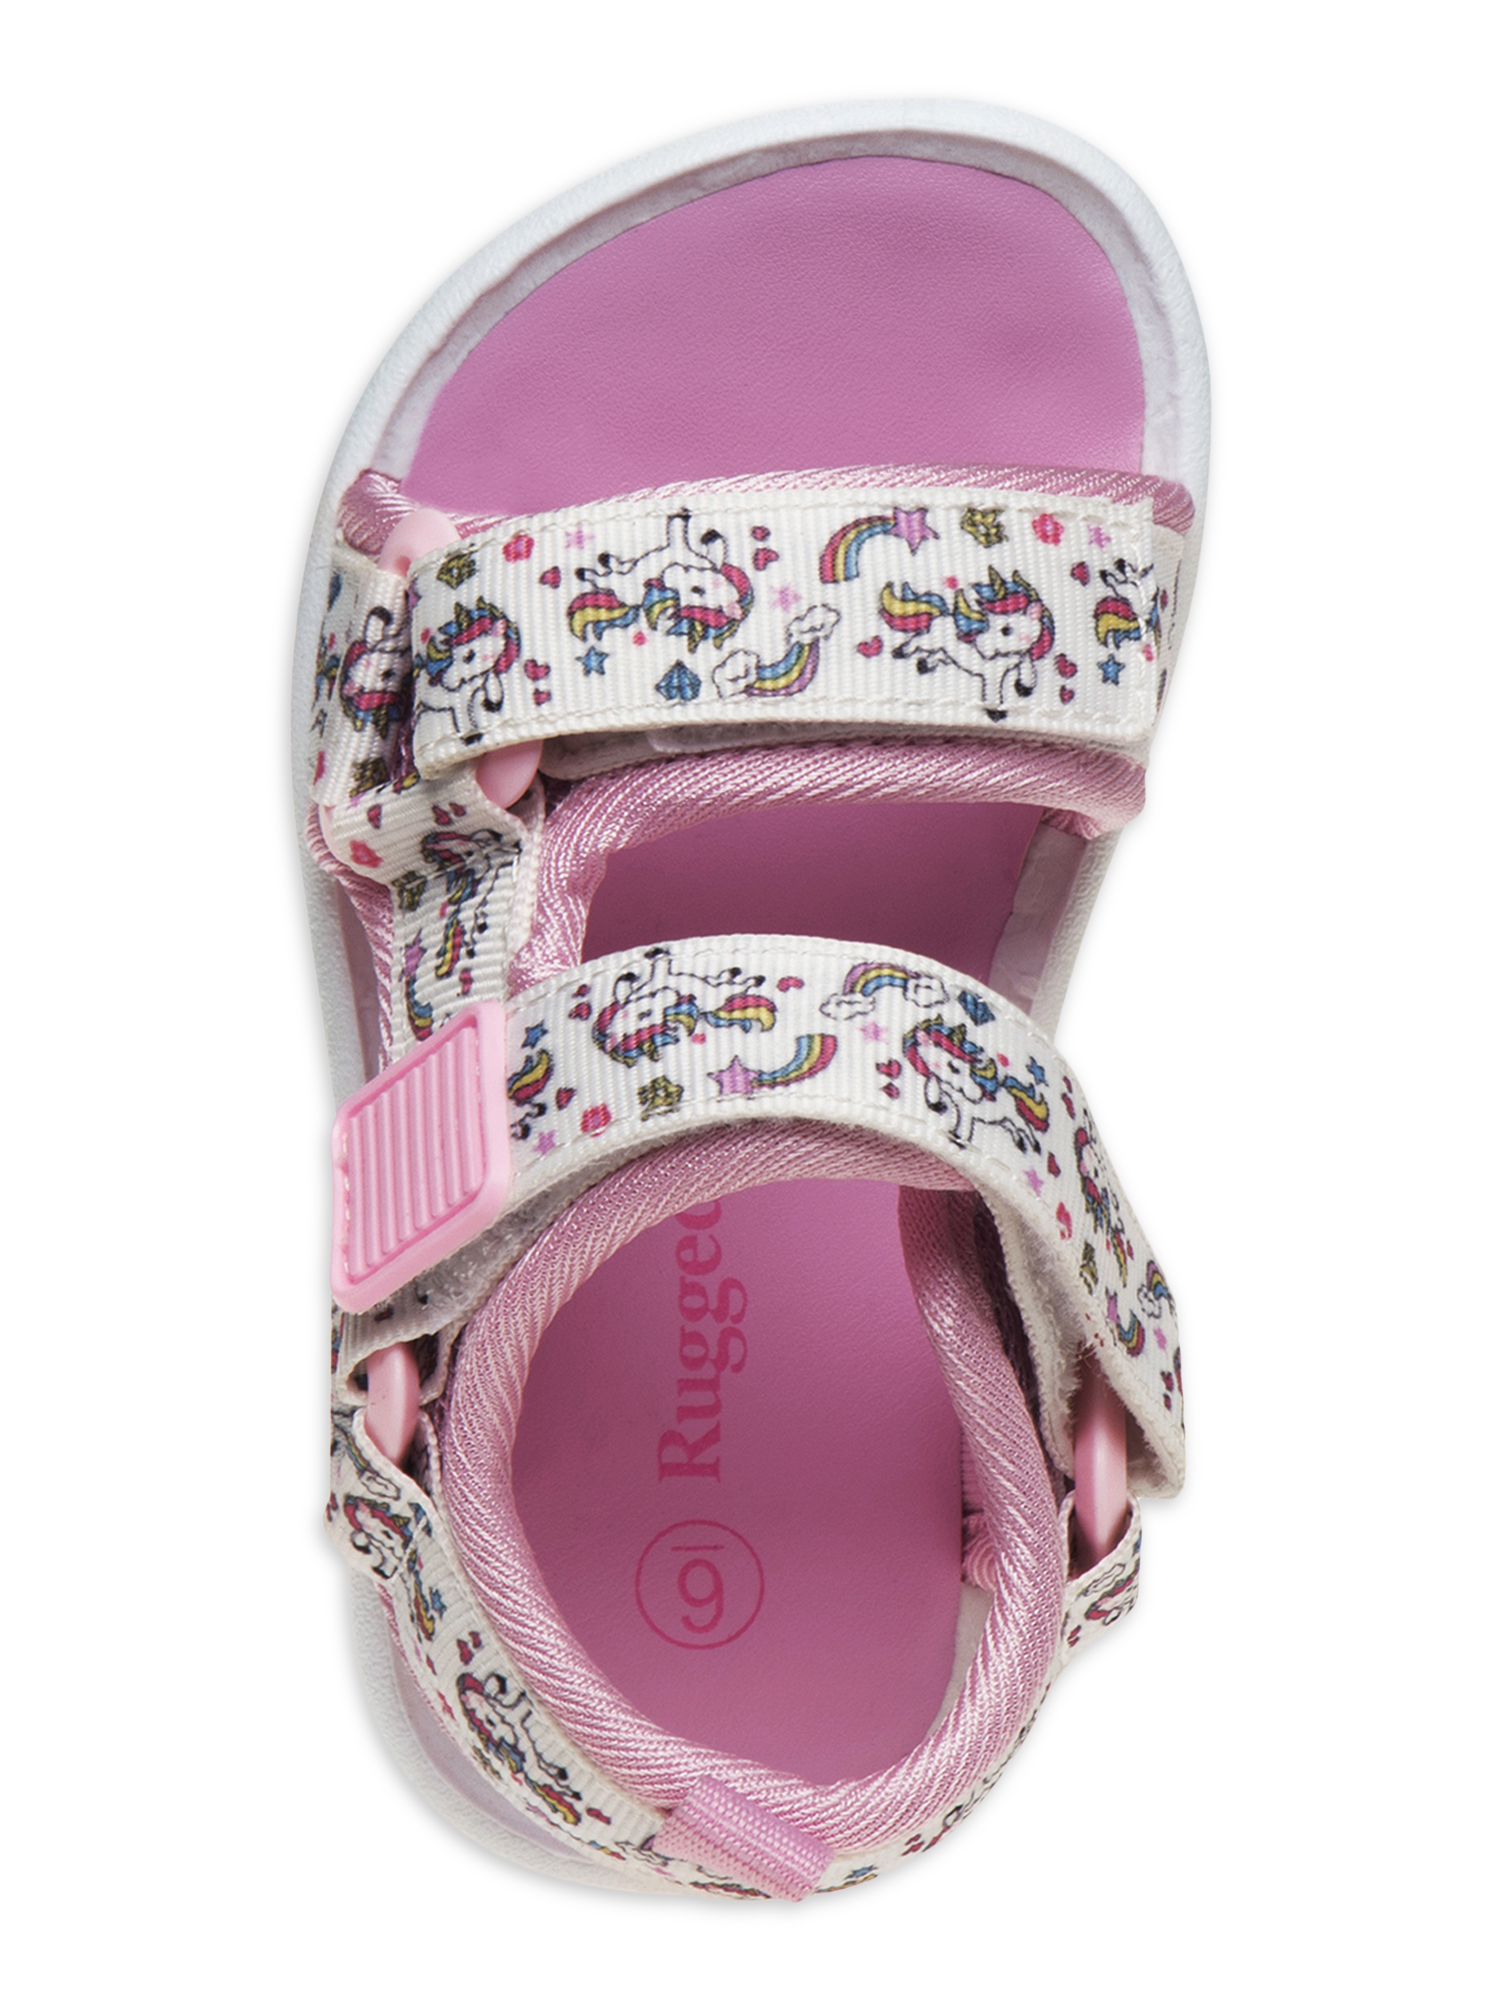 Rugged Bear Unicorn & Rainbows Two Strap Athletic Sandals (Toddler Girls) - image 5 of 5